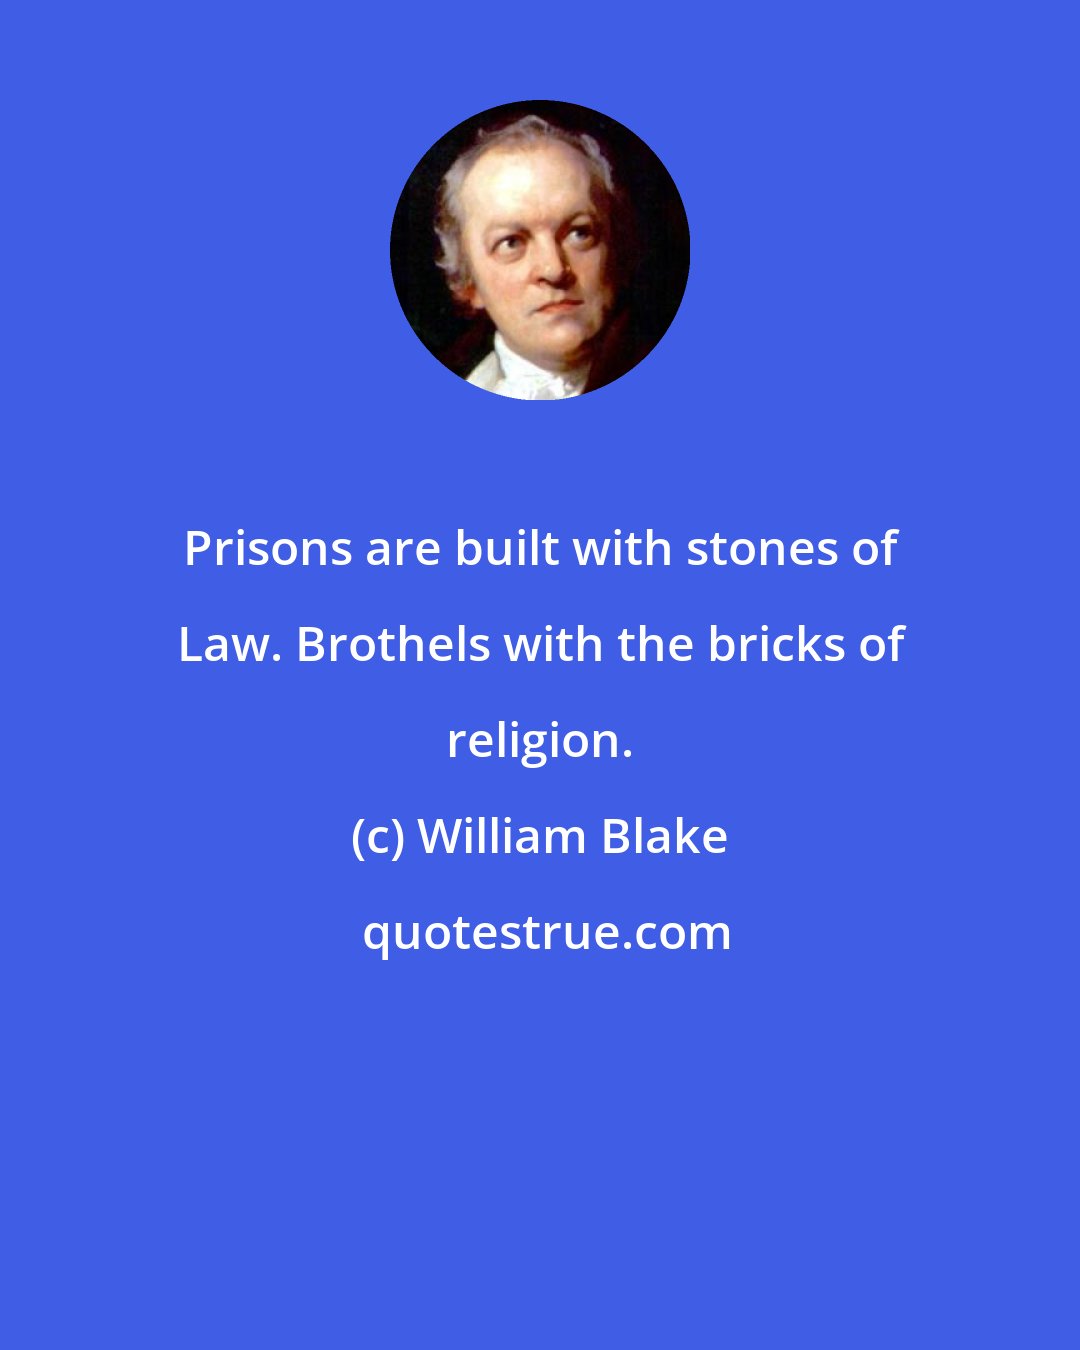 William Blake: Prisons are built with stones of Law. Brothels with the bricks of religion.